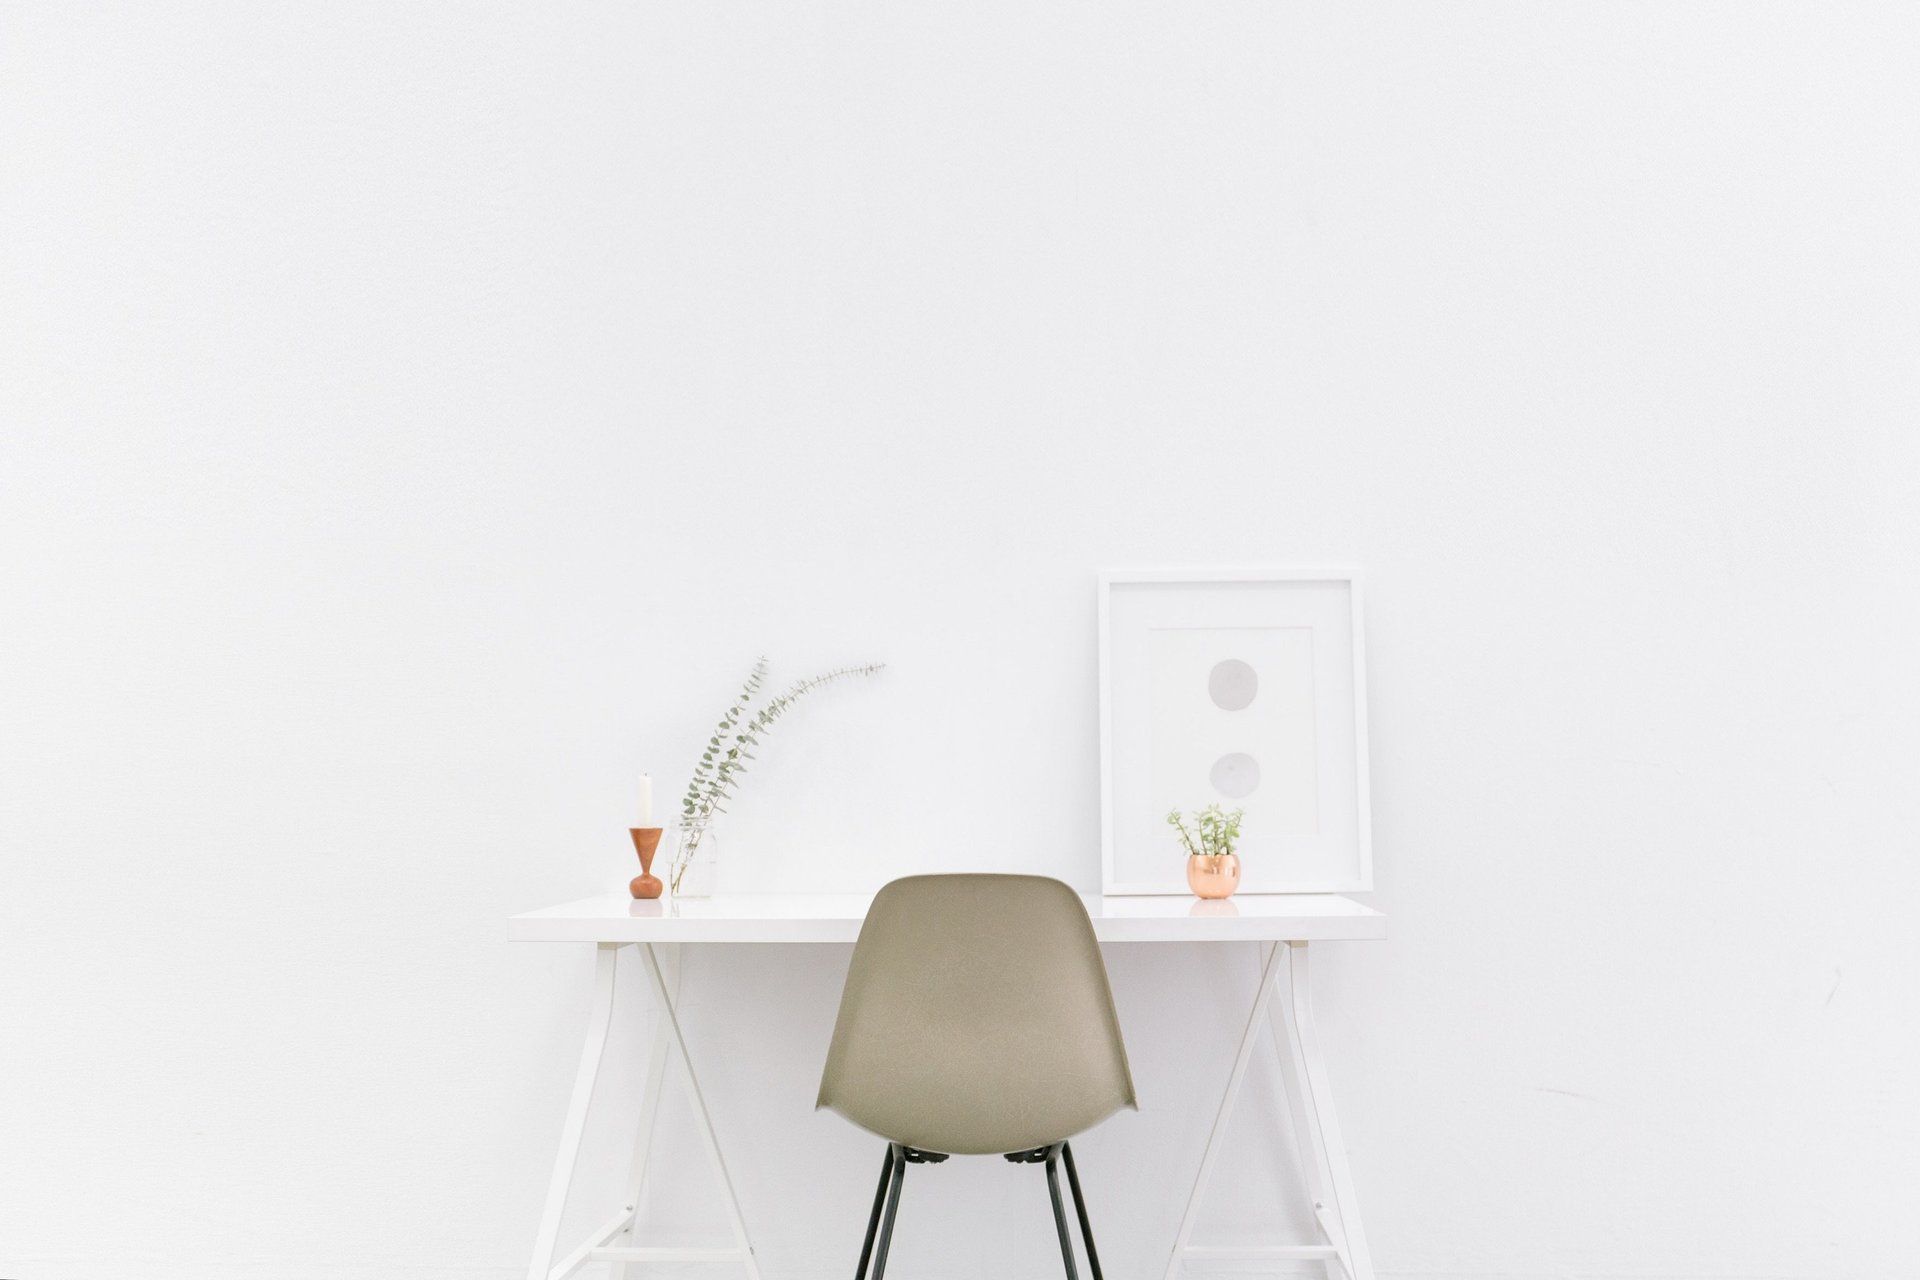 A chair at a desk in front of a white wall.